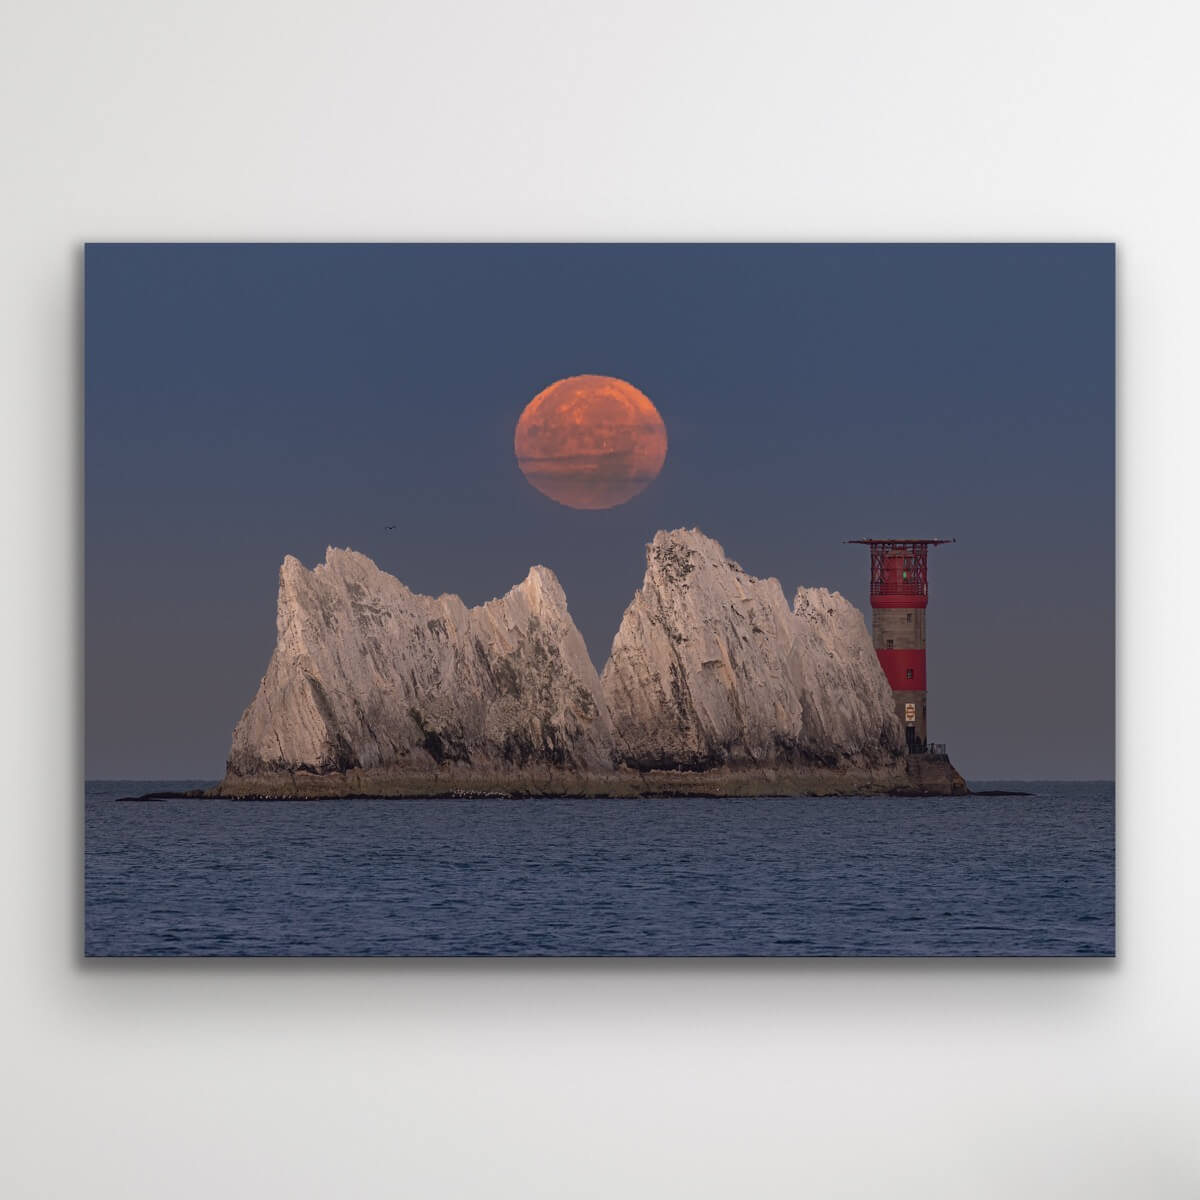 Moonset over The Needles Photograph Gallery Isle of Wight Landscape Prints